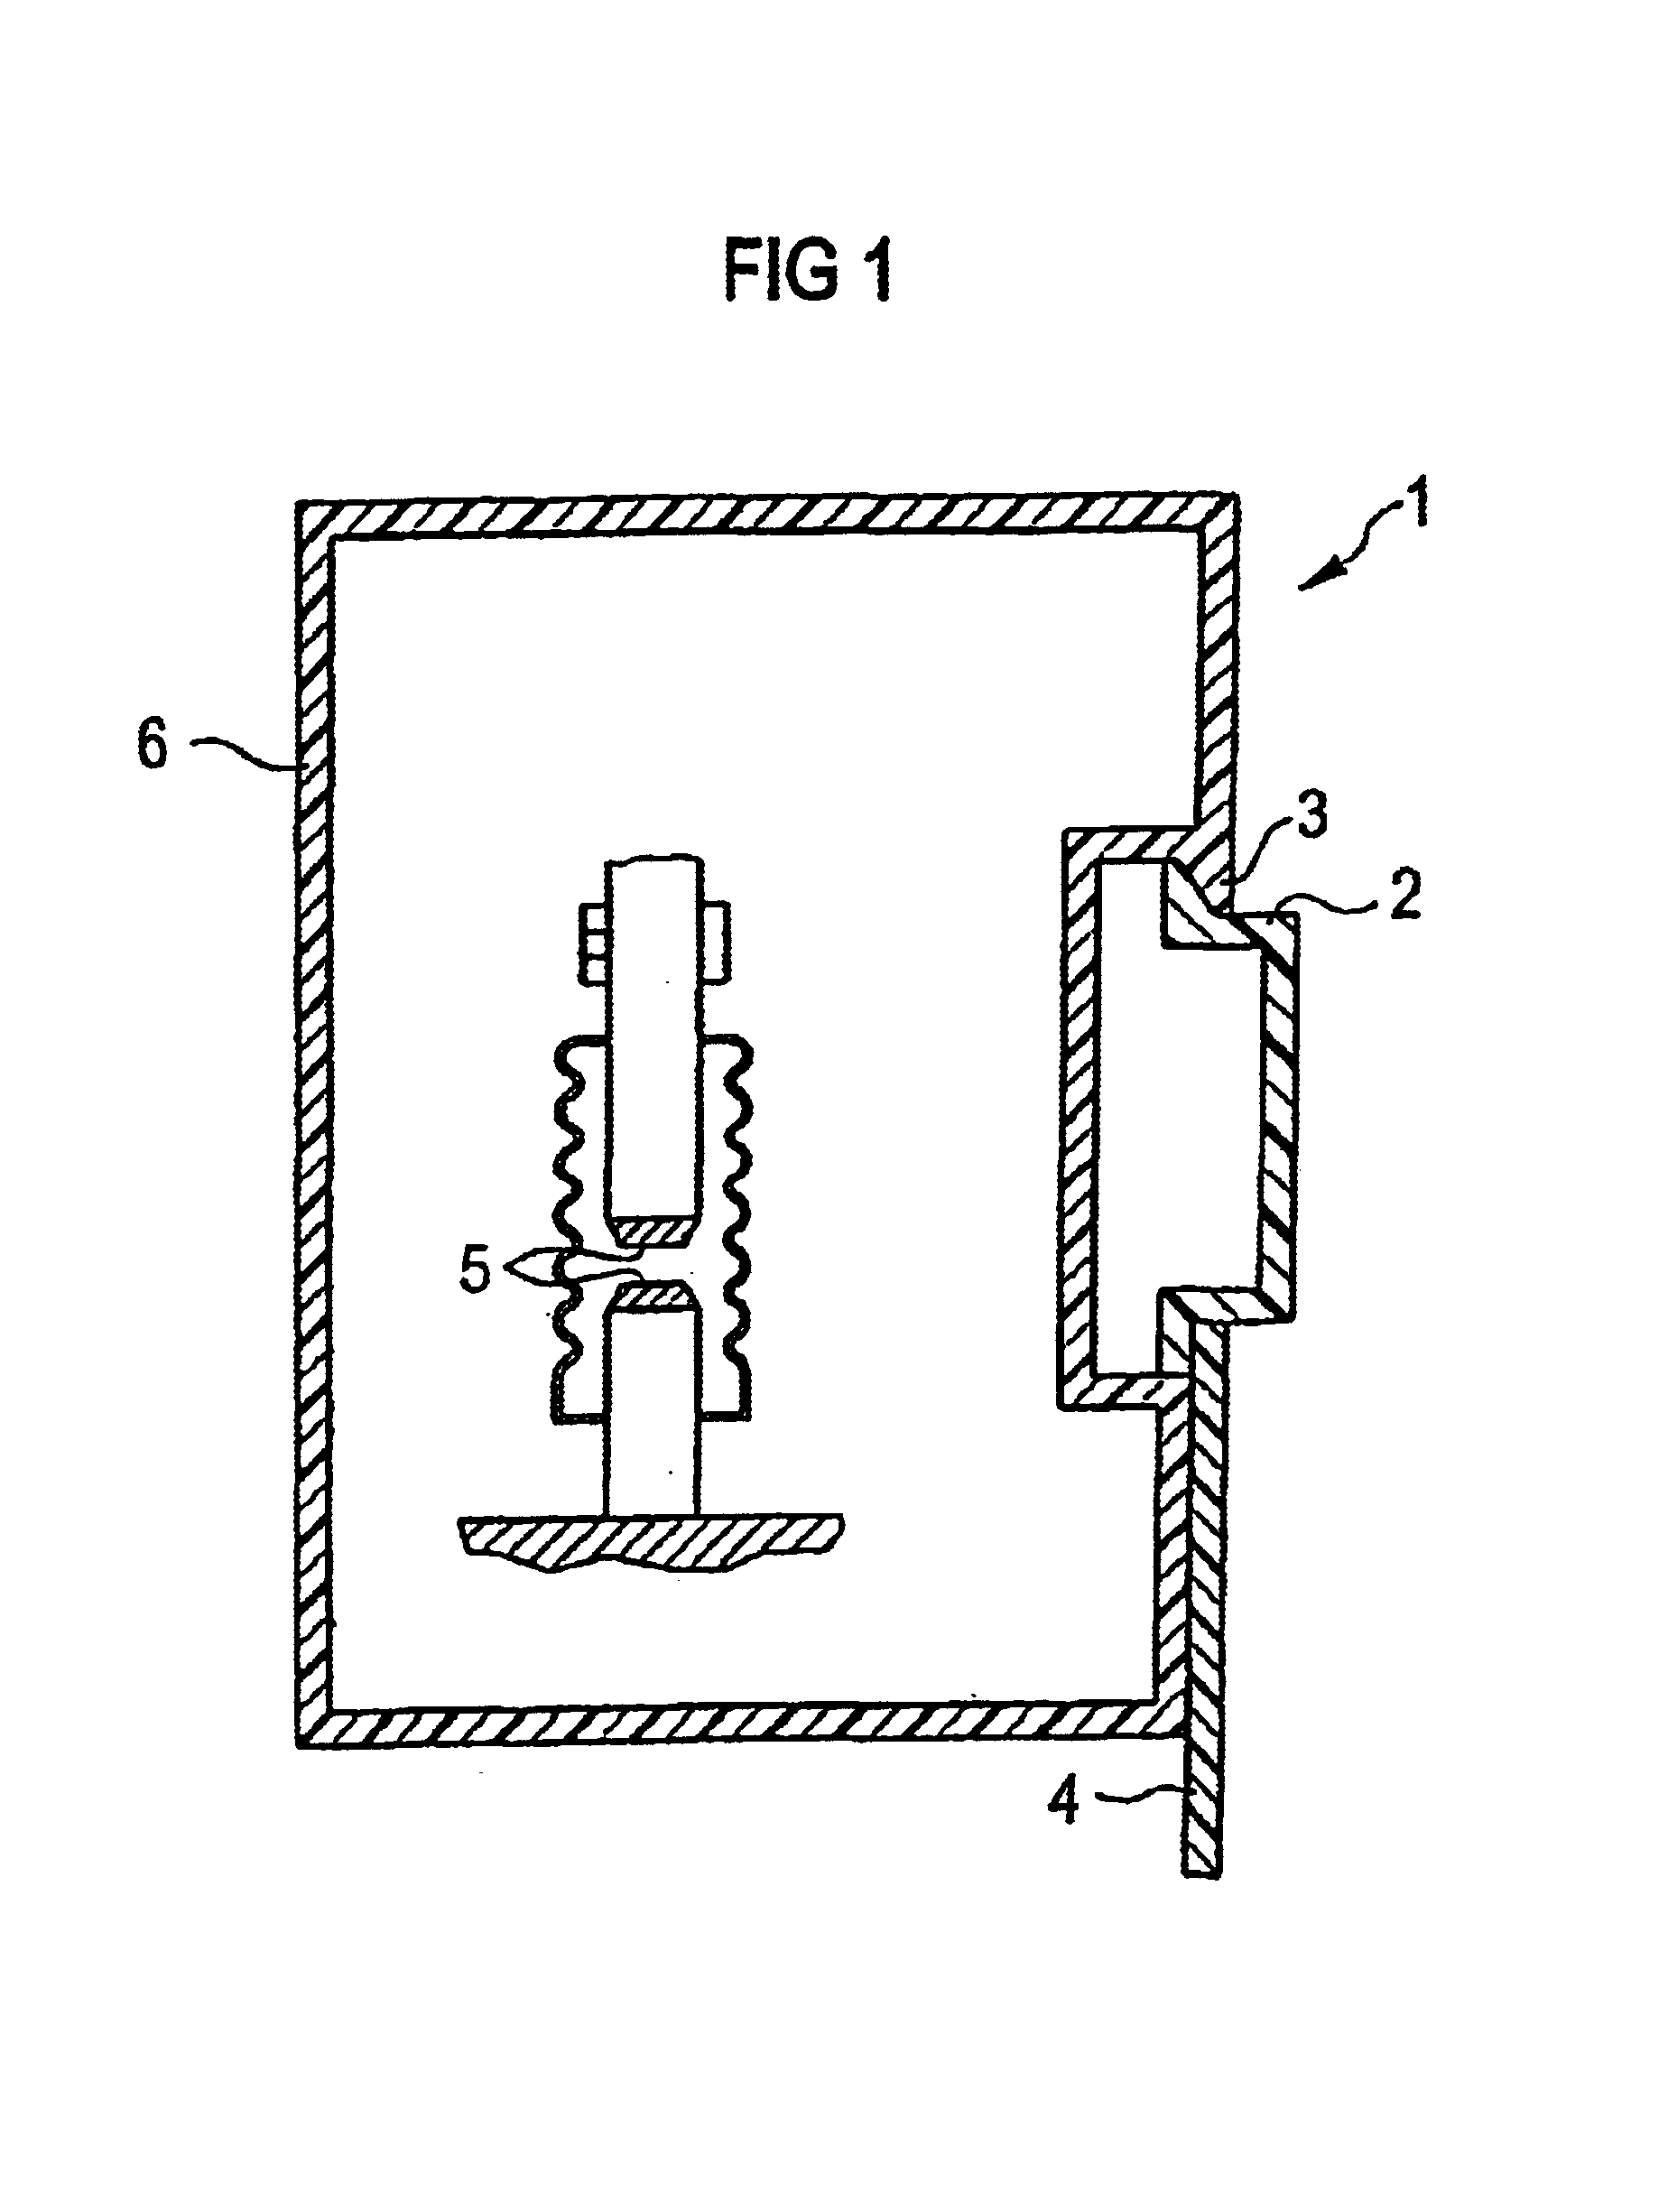 Electrical unit with a connector for a loop through conductor